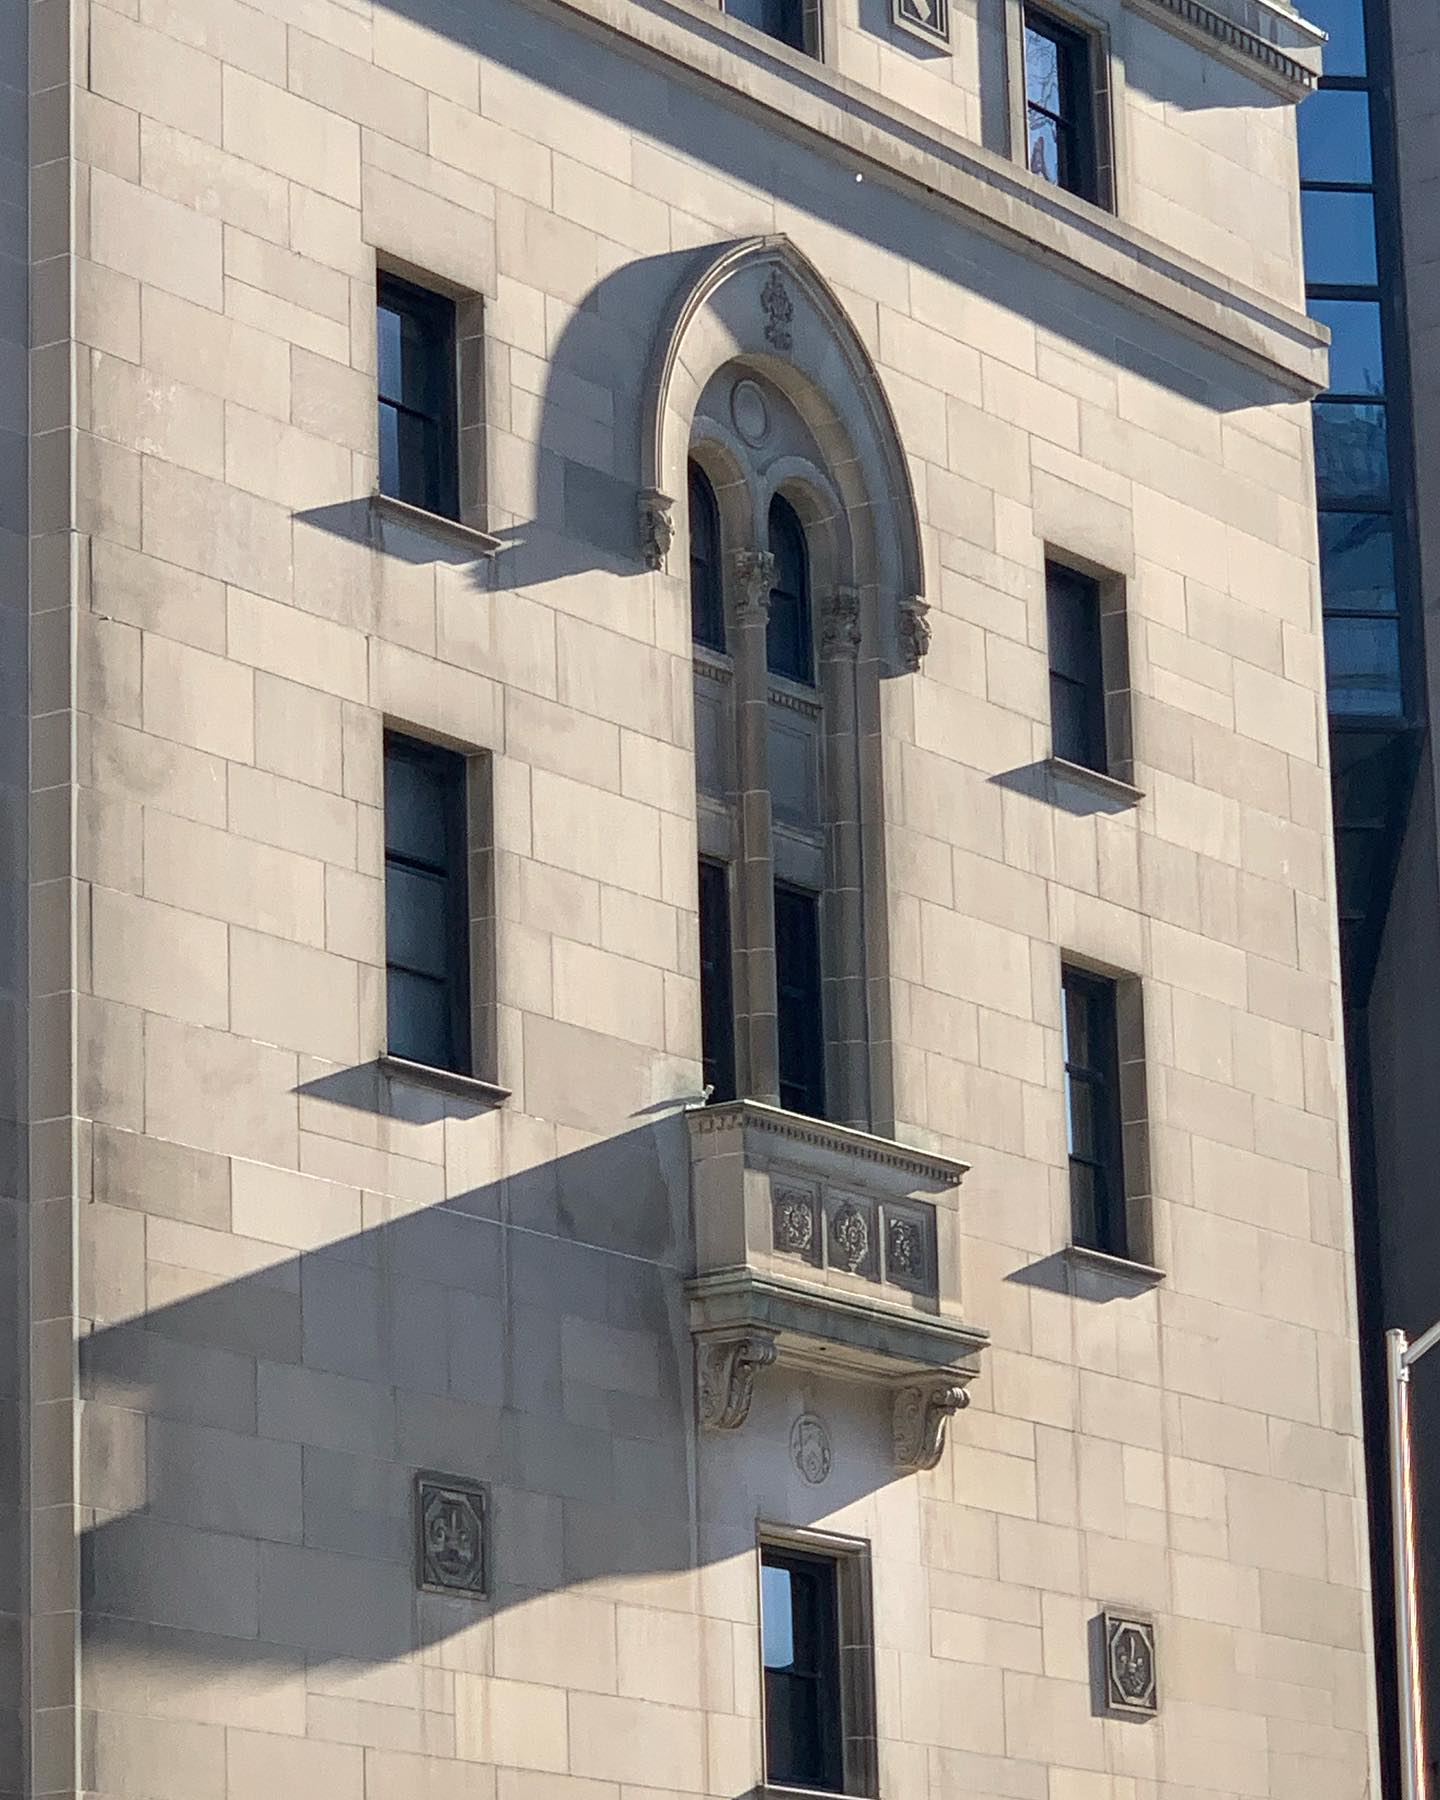 Can you name this iconic Toronto building?  Over the years @thehidigroup has provided various design services and most recently provided Electrical and Communications for the recently renovated Library Bar. #thg #engineeringtomorrow #historicbuildings #hospitality #librarybar #canyouguess photo by @trevorgodinho